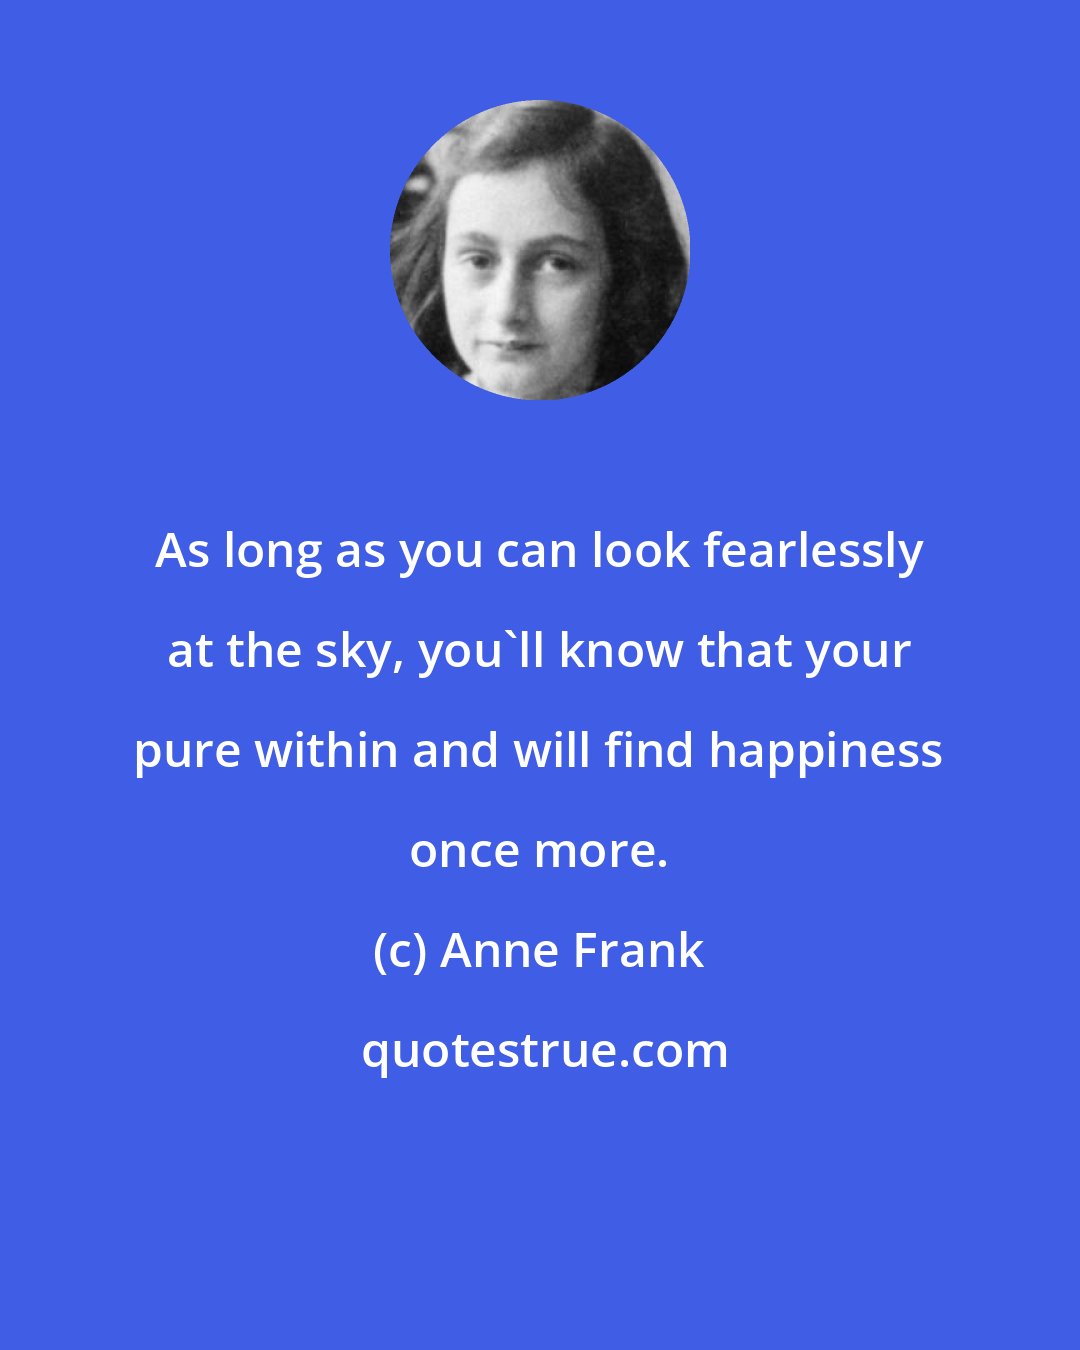 Anne Frank: As long as you can look fearlessly at the sky, you'll know that your pure within and will find happiness once more.